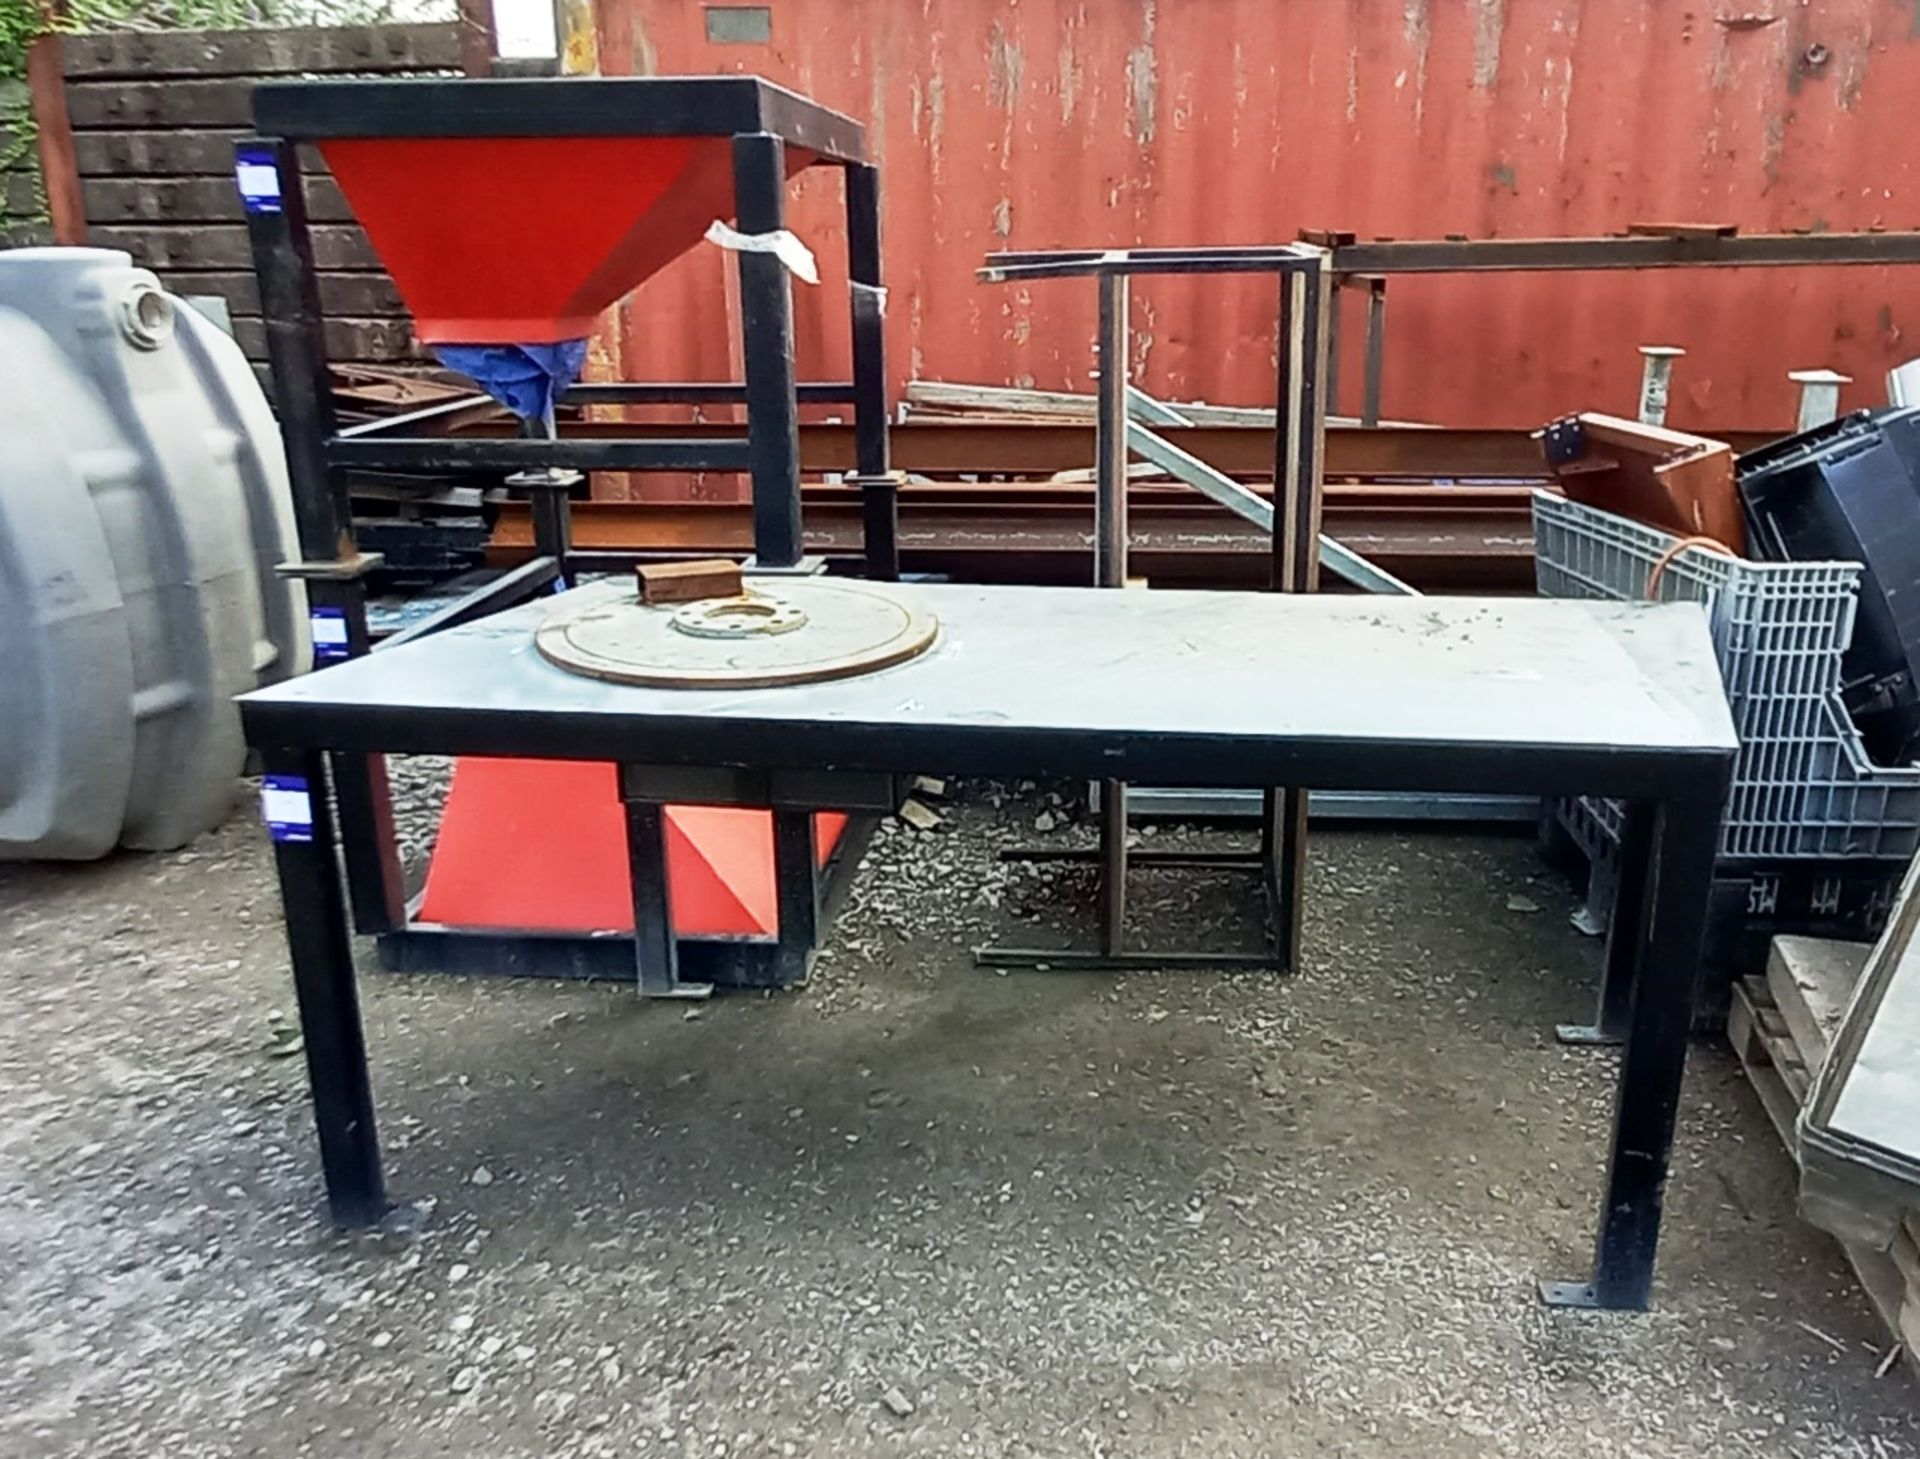 4x Various Sized Work Benches. Approximate Sizes: 1x (2050 x 870mm), 2x (1200 x 970mm), 1x (1250 x